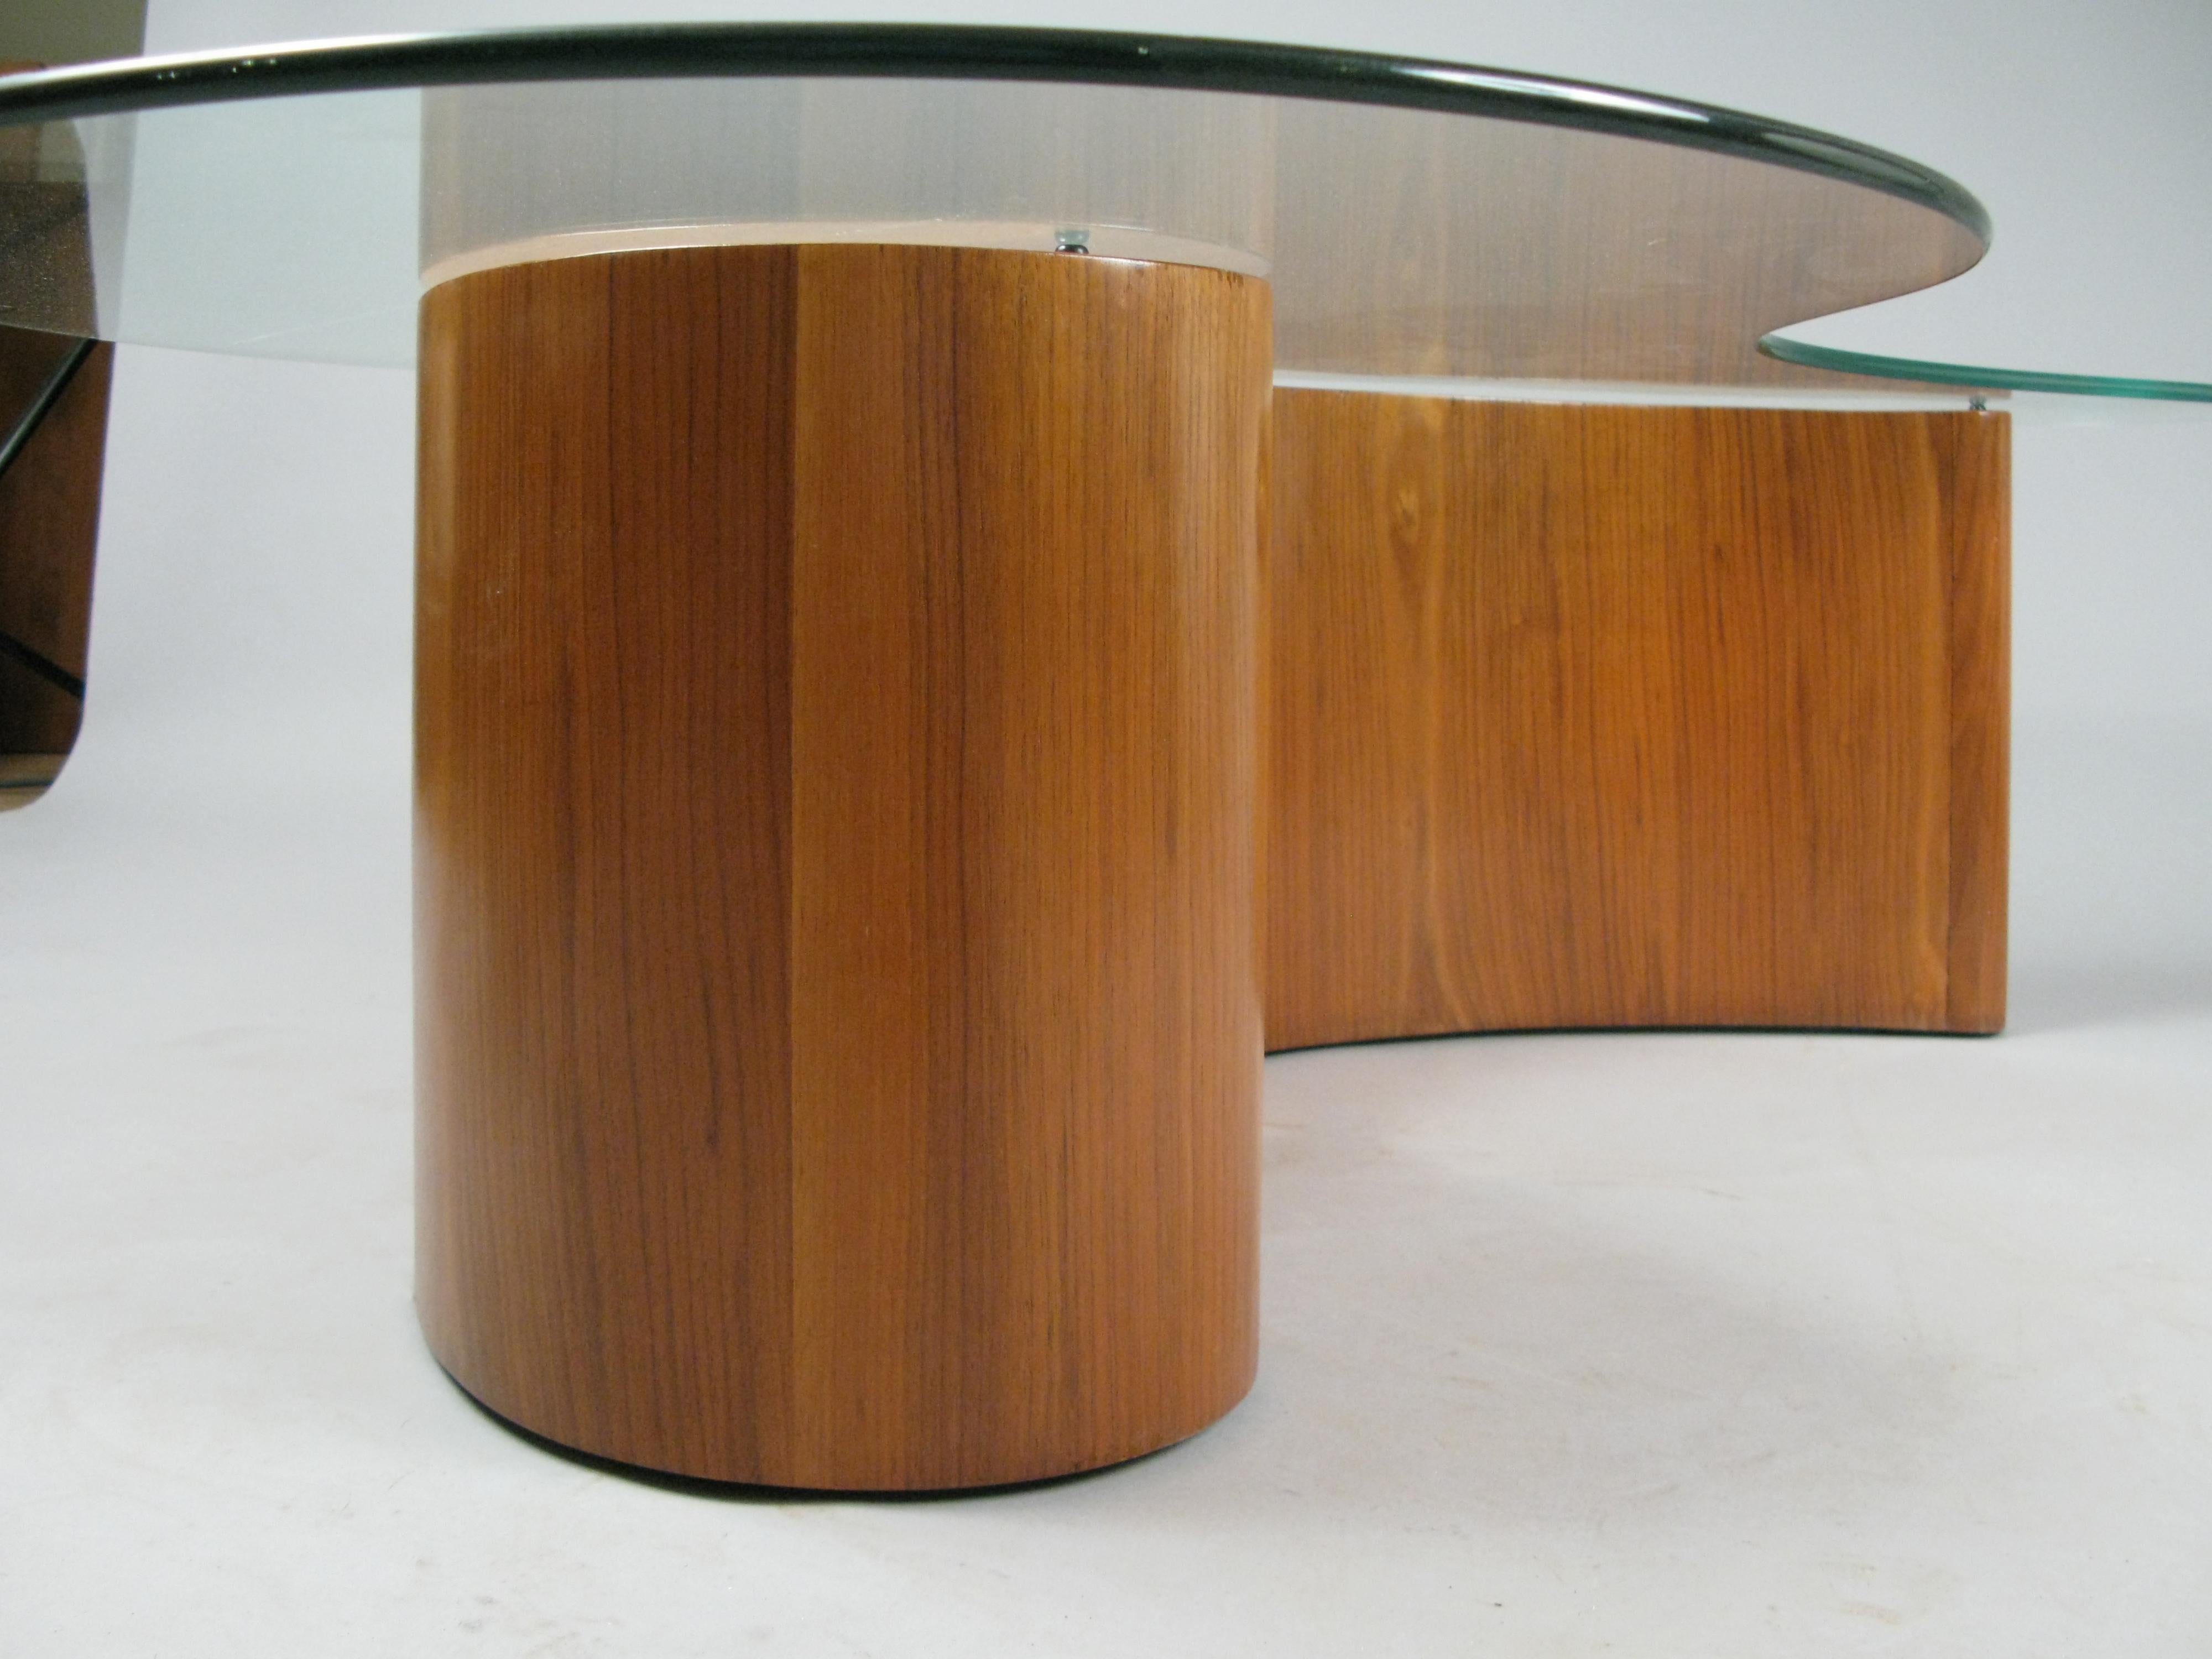 American Walnut and Glass Apostrophe Table by Vladimir Kagan